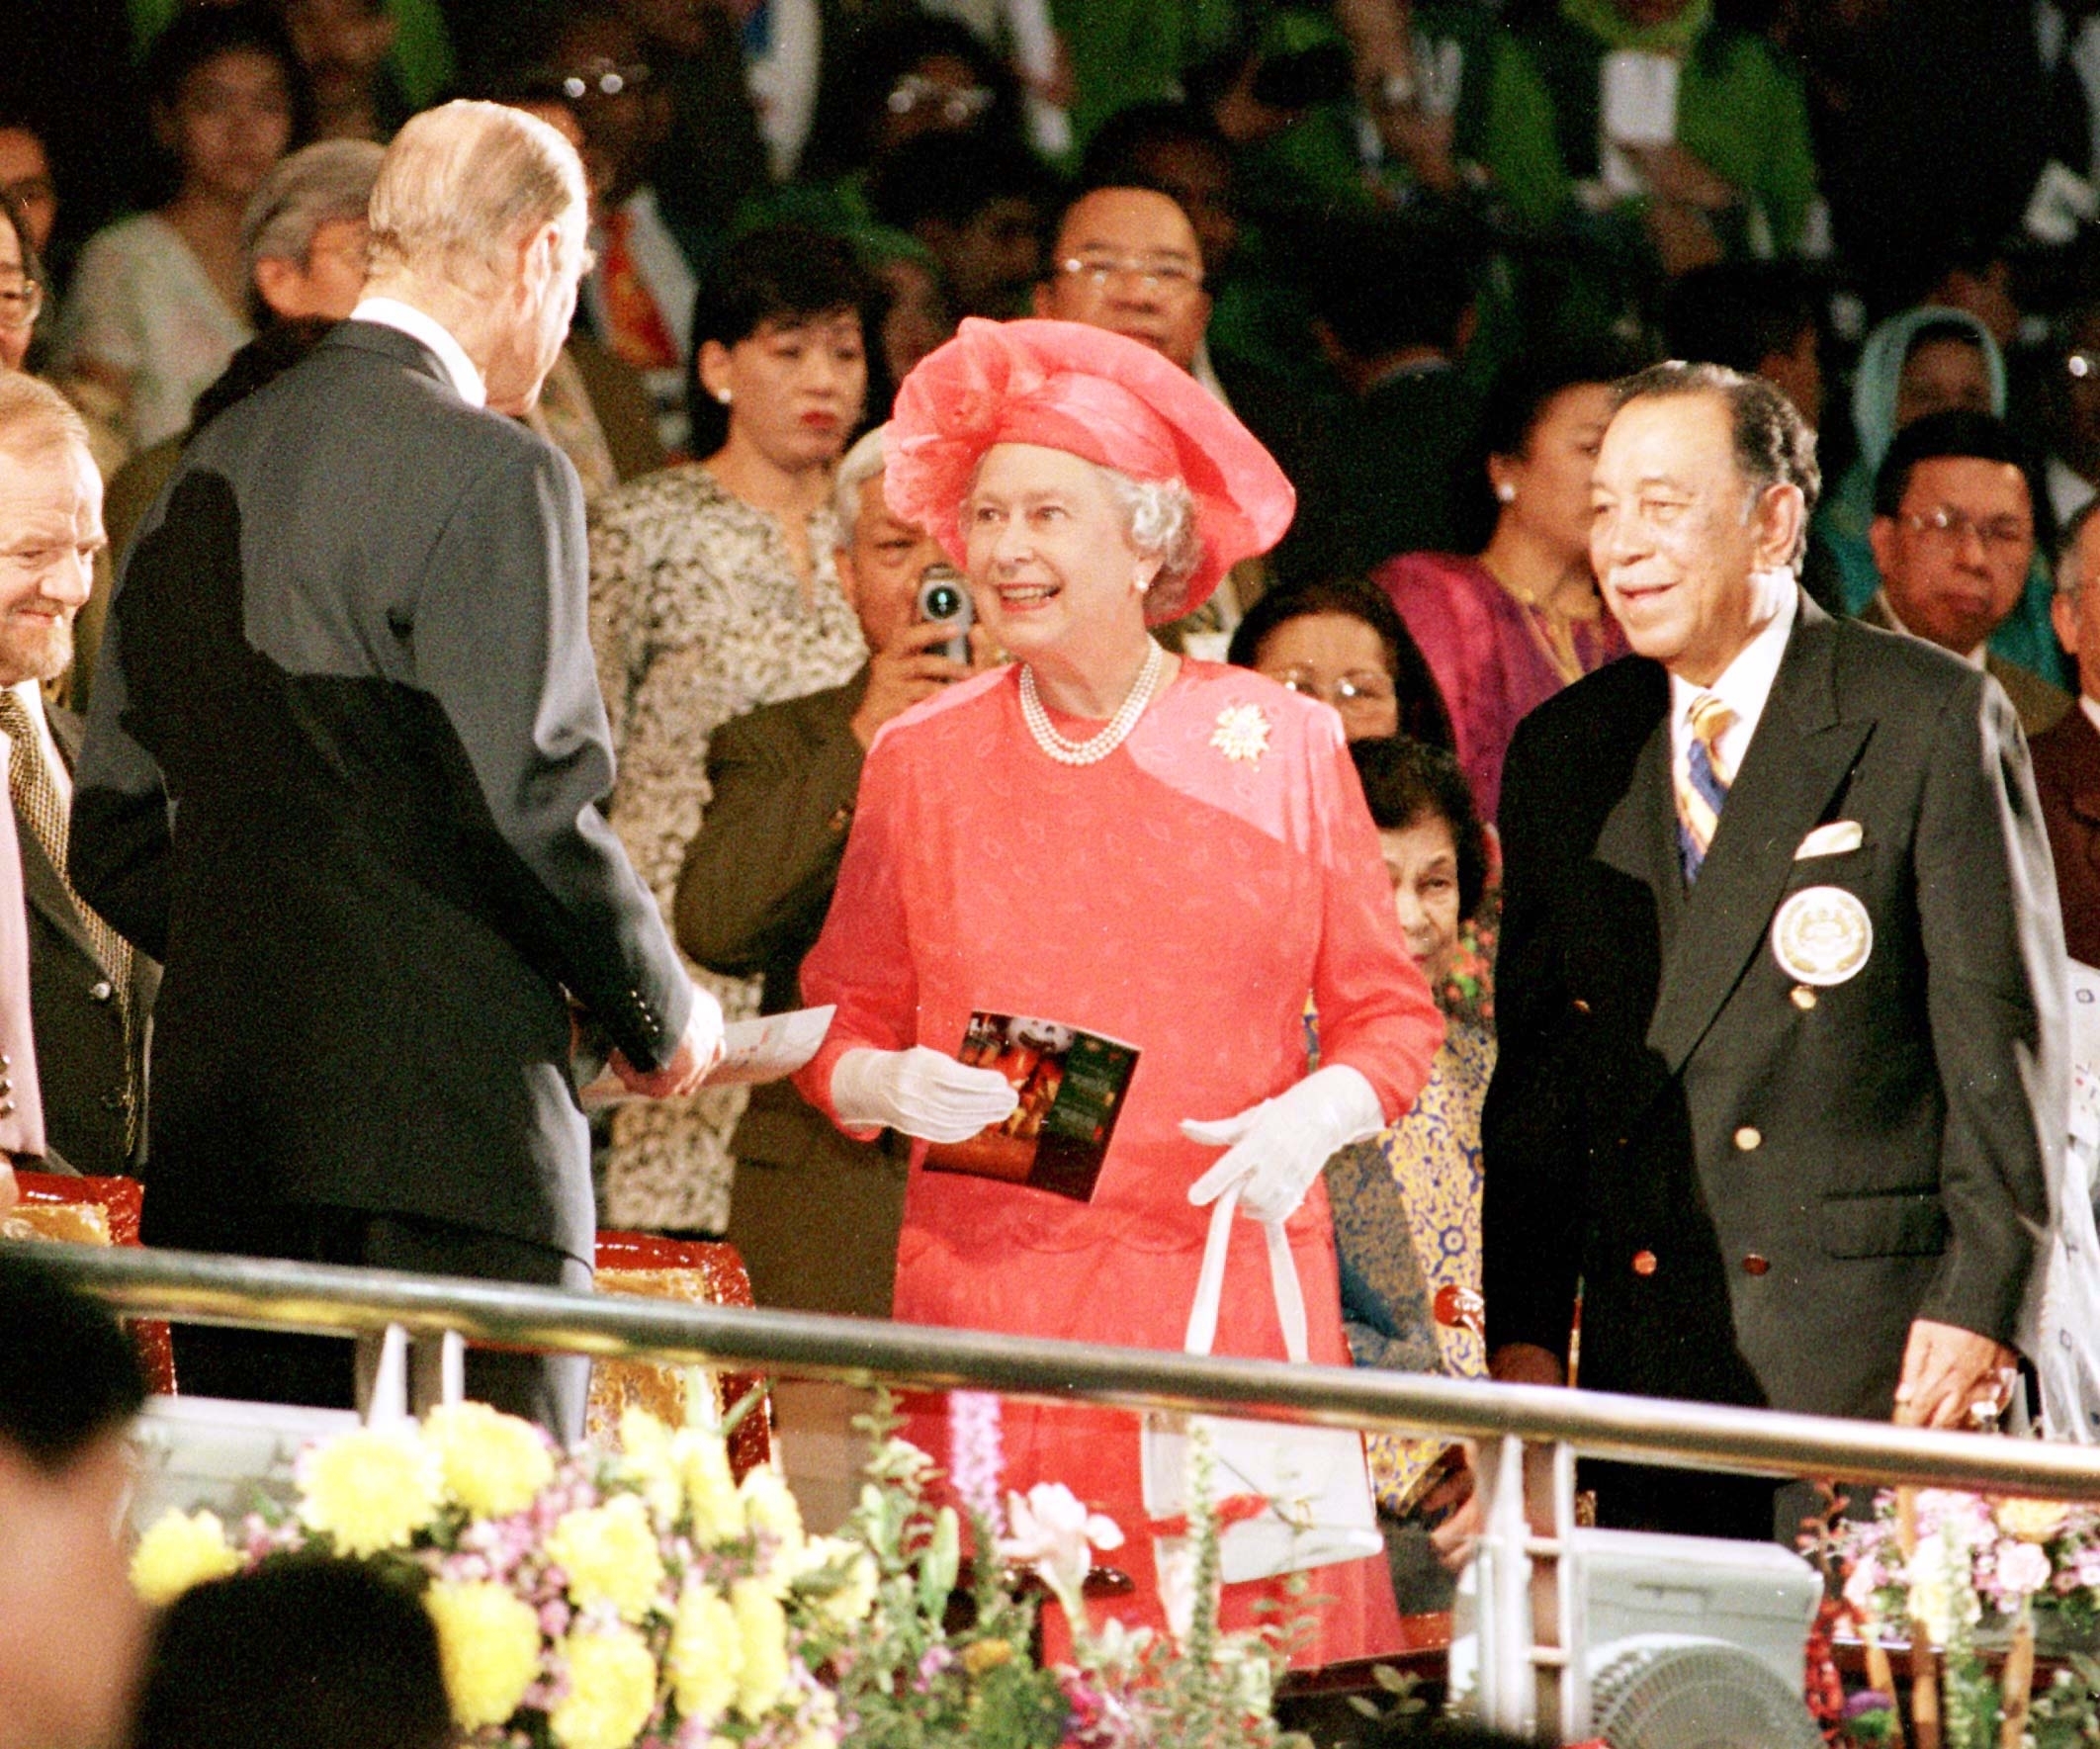 The Queen shares a smile with the Duke of Edinburgh in the Royal box during the closing ceremony of the Commonwealth Games tonight (Monday). The Agong (King) of Malaysia, Raja Permaisuri, is on the right and Foreign Secretary Robin Cook is far left. 